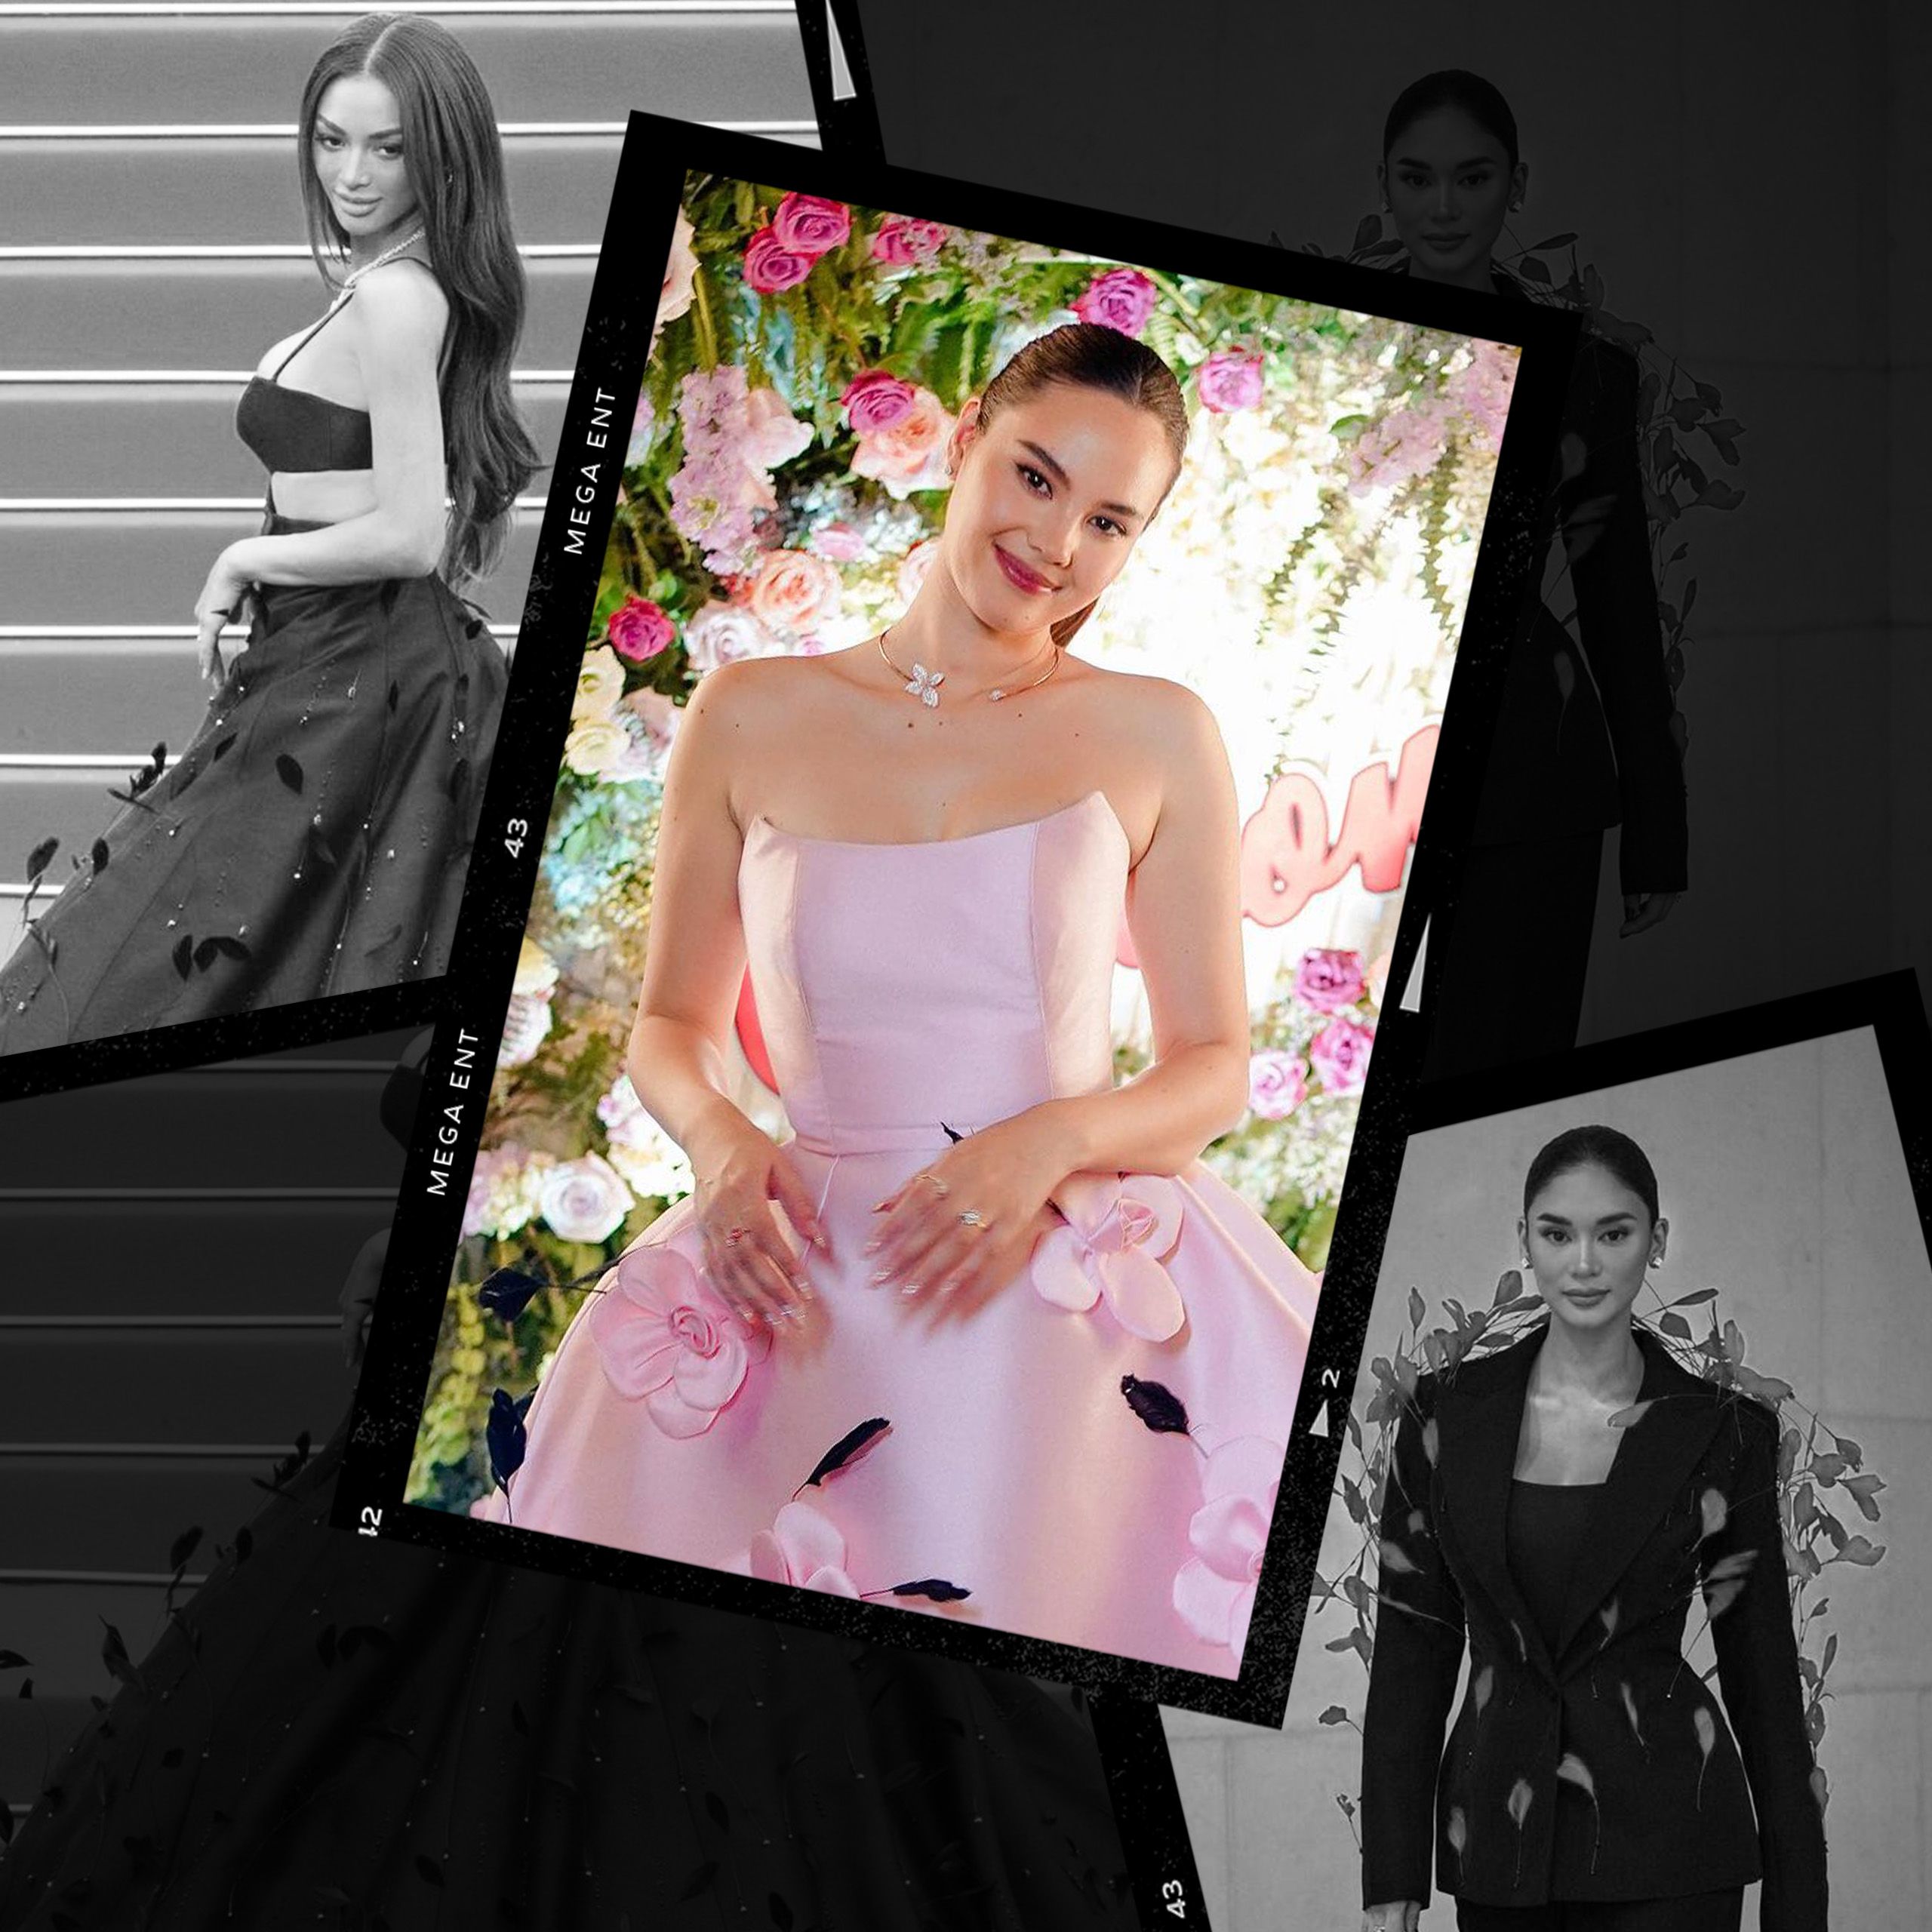 Pia Wurtzbach, Kylie Verzosa, and Catriona Gray Channel the Feathered Look in Different Ways